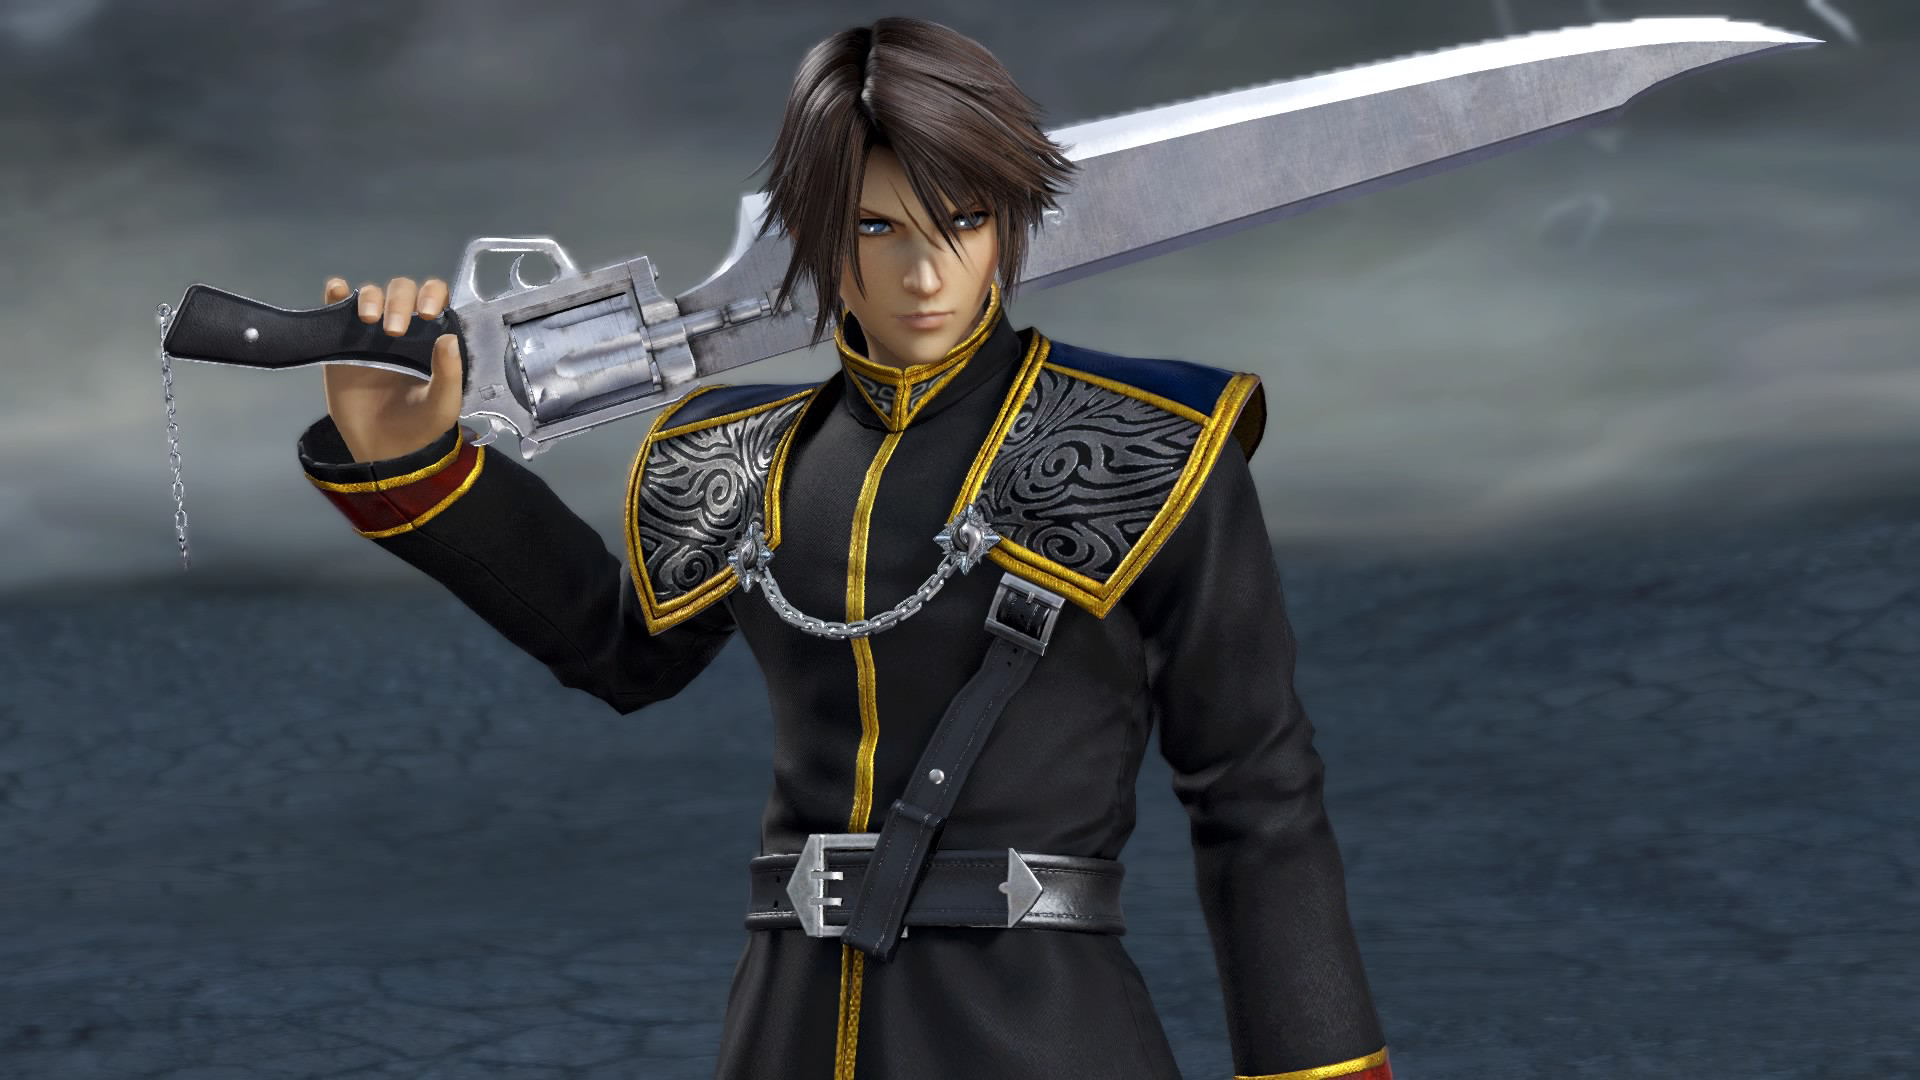 DFF NT: SeeD Uniform Appearance Set for Squall Leonhart Featured Screenshot #1